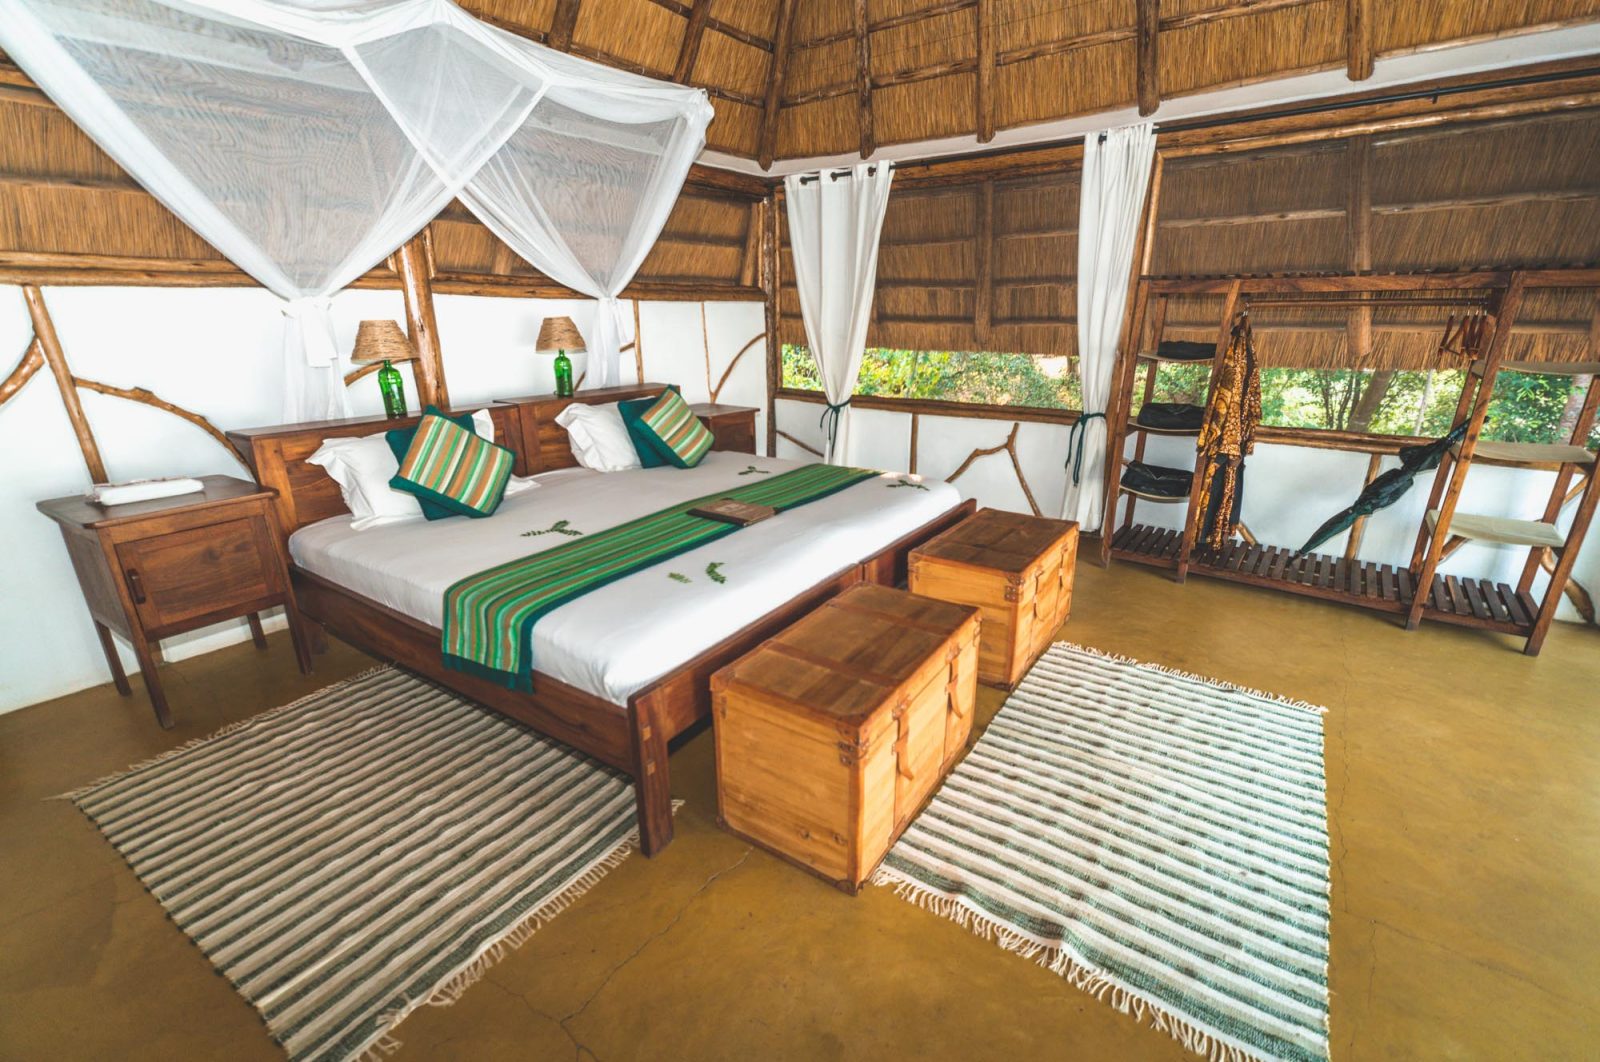 Inside the tent at Baker's Lodge, Murchison Falls National Park